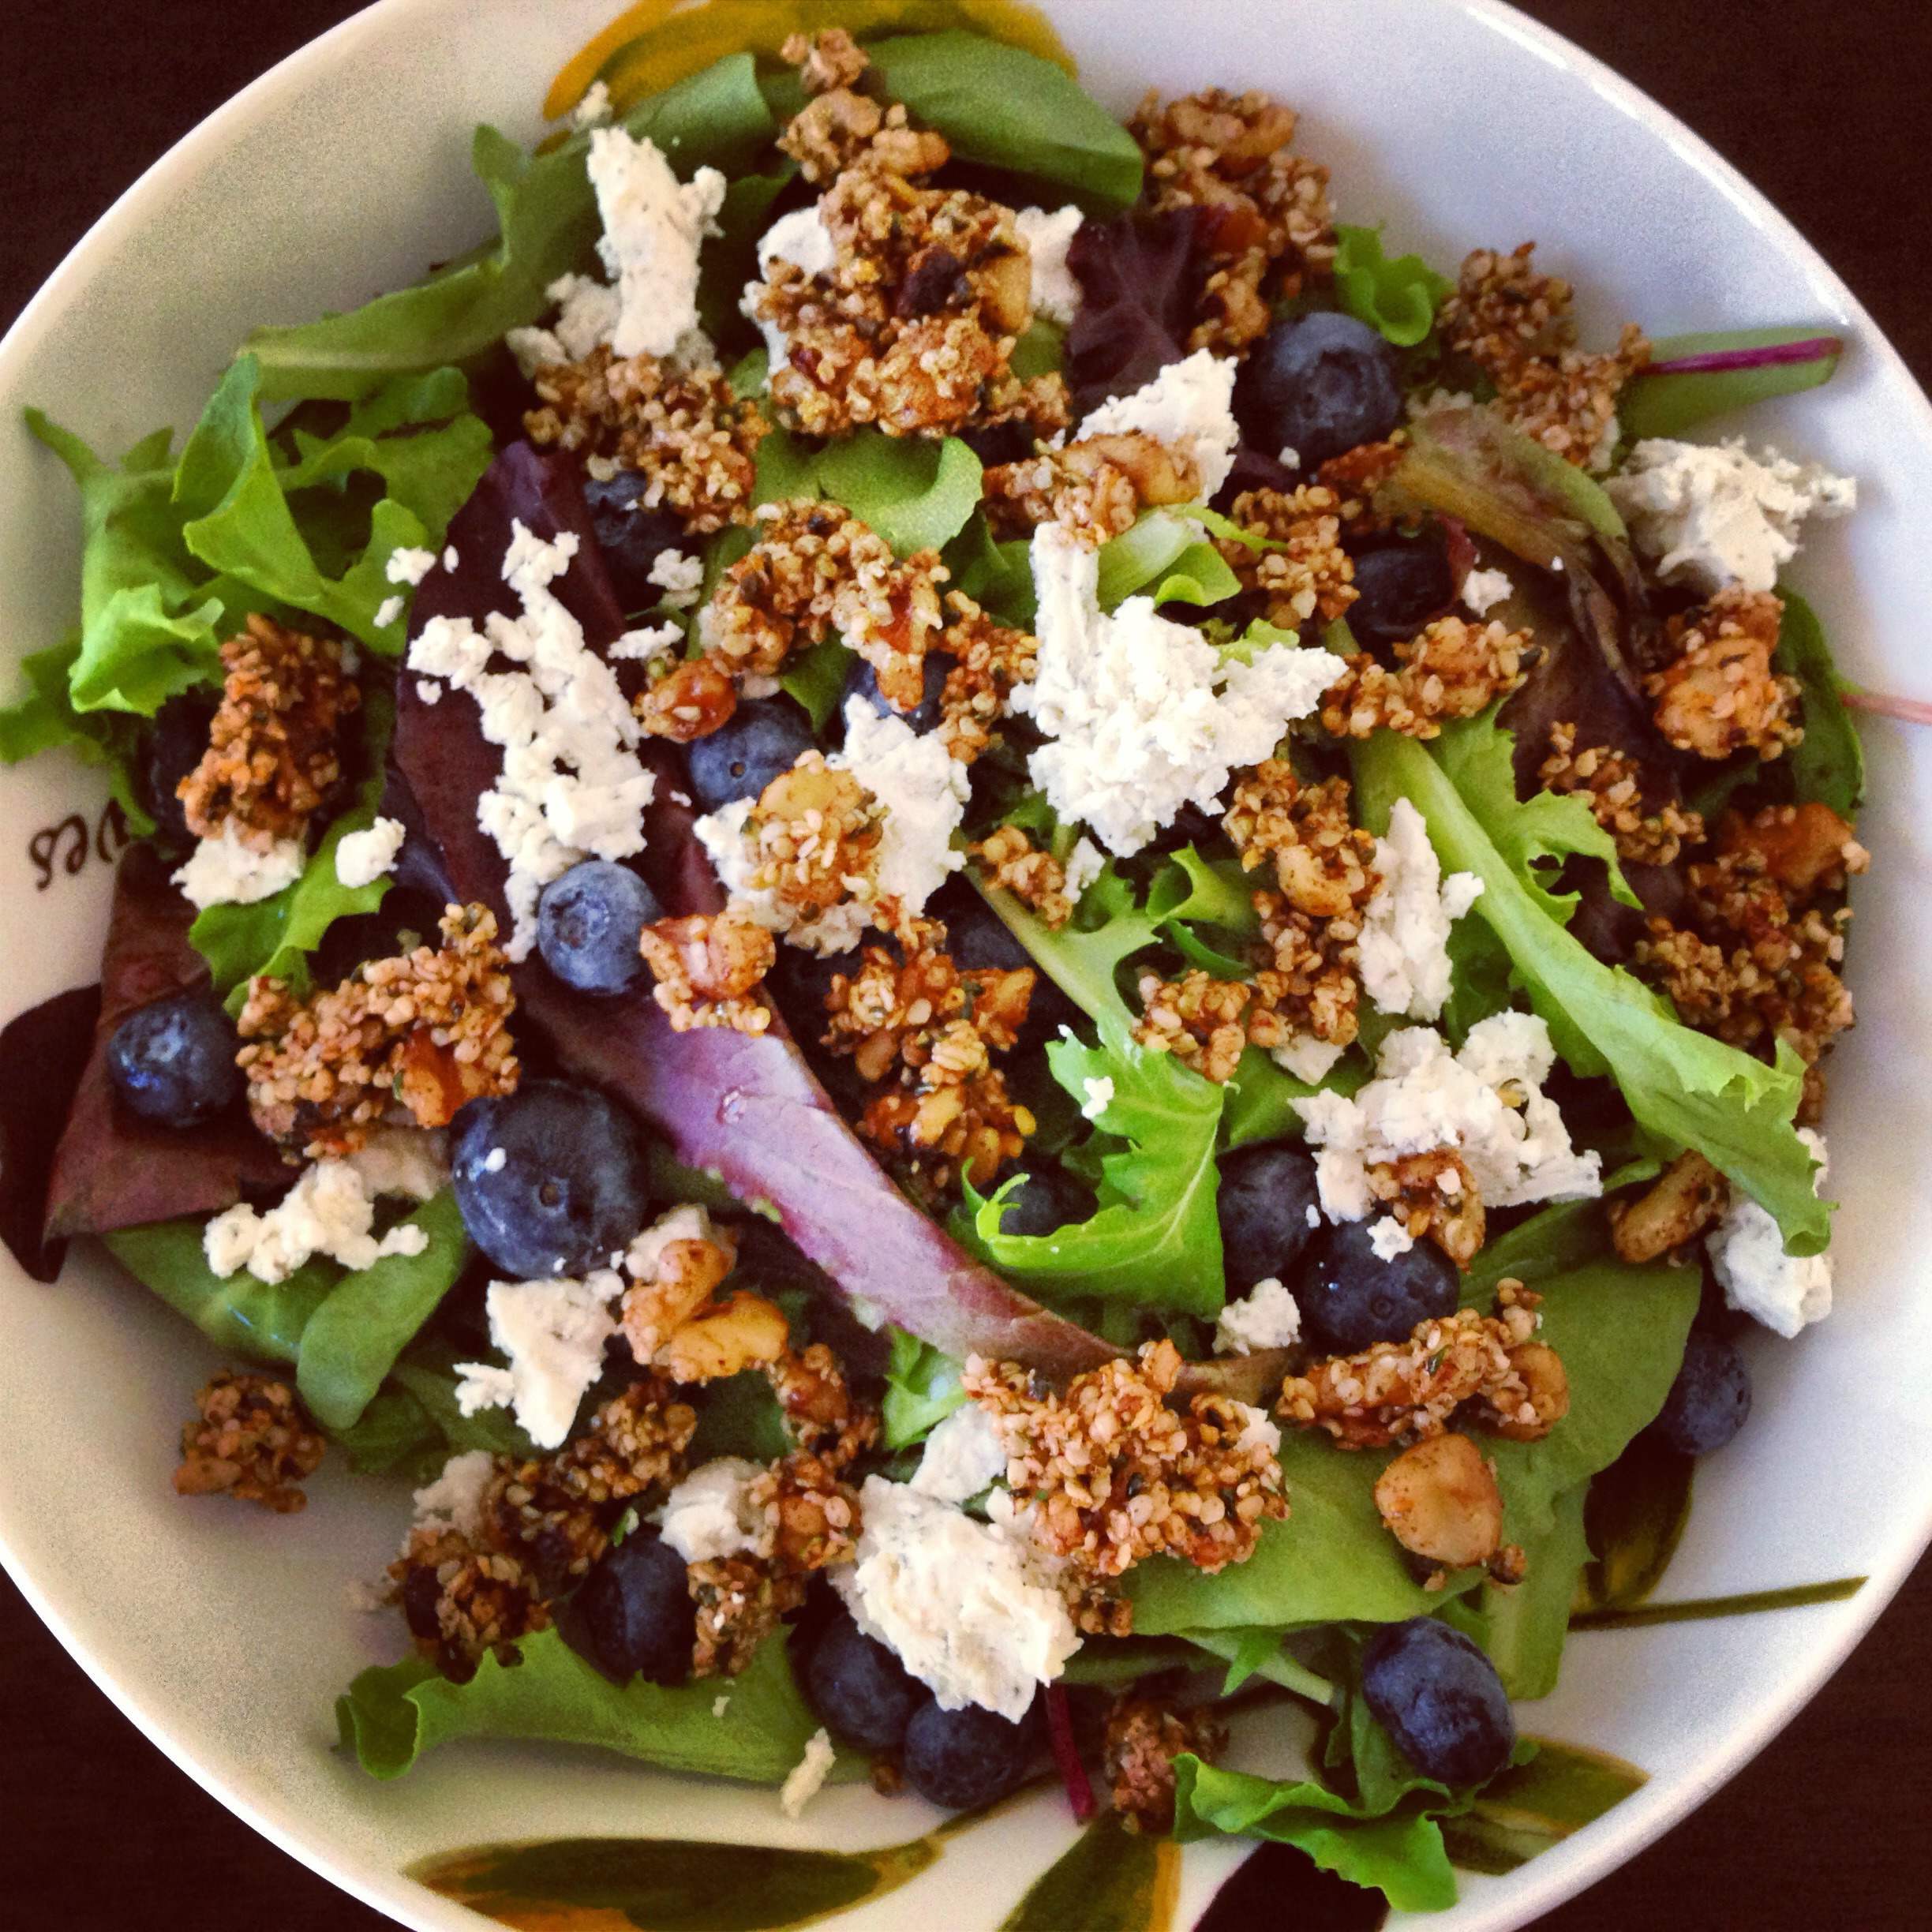 Mixed Green Salad with Blueberries, Goat Cheese & Honeyed Walnut -n- Hemp Seed Clusters